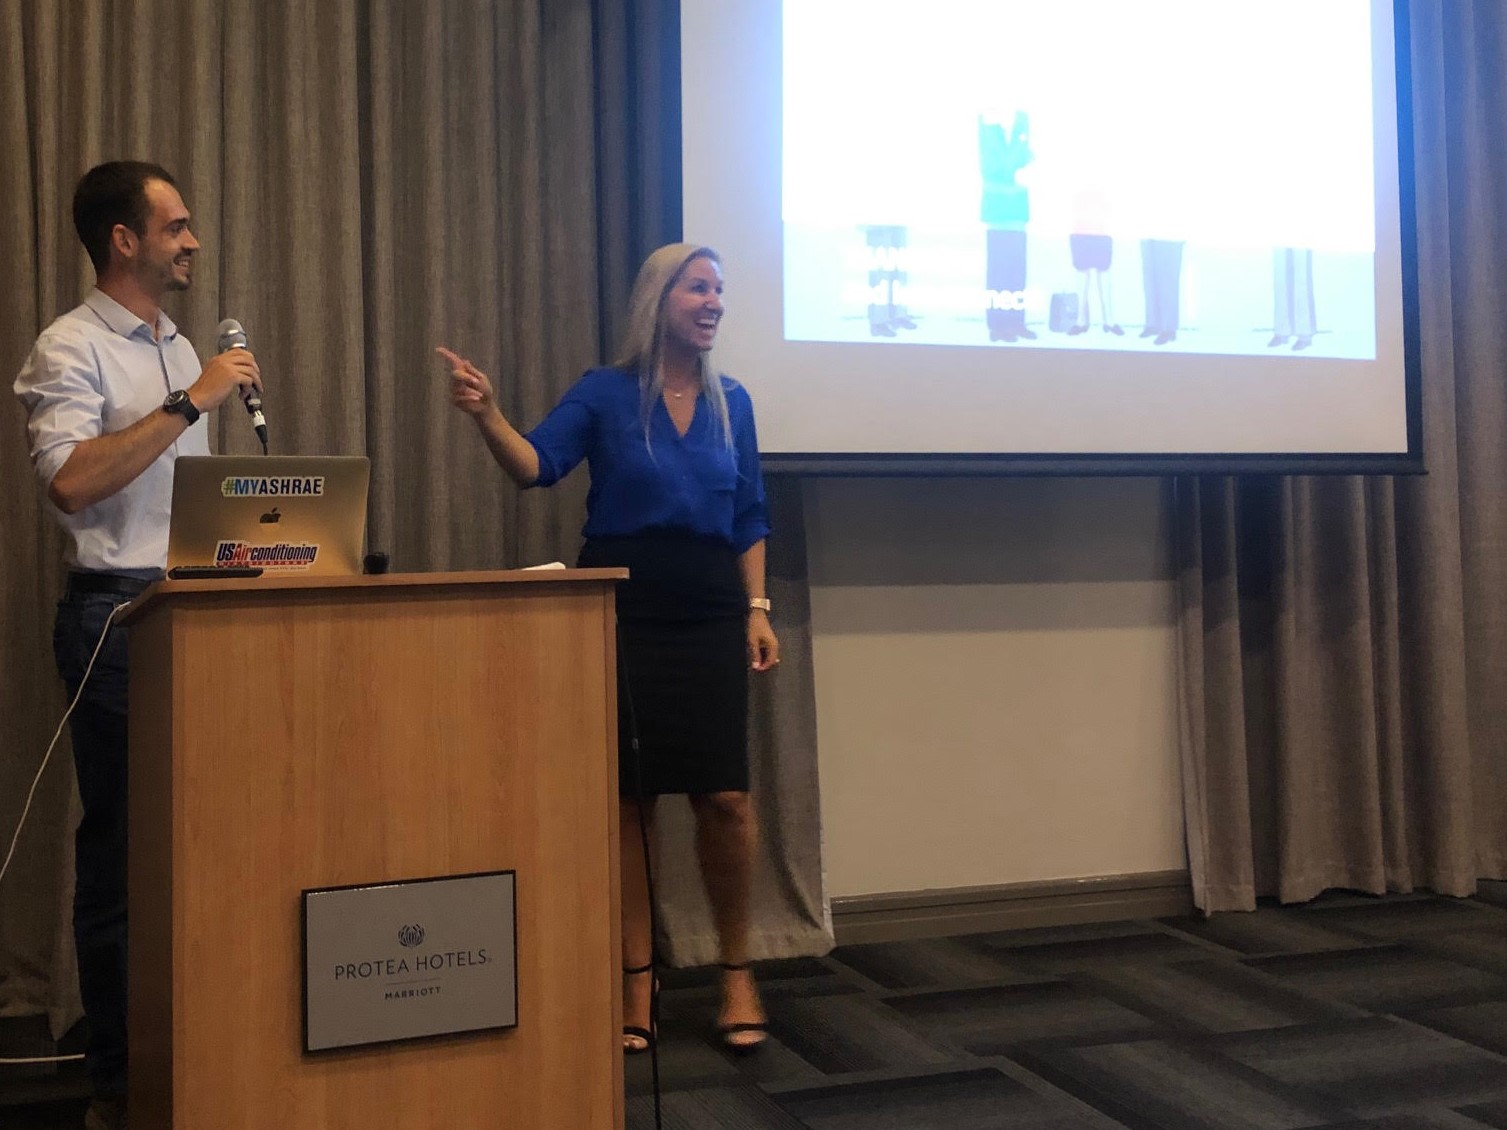 Photograph from ASHRAE Distinguished lecture by Karine LeBlanc, South Africa, March 2020